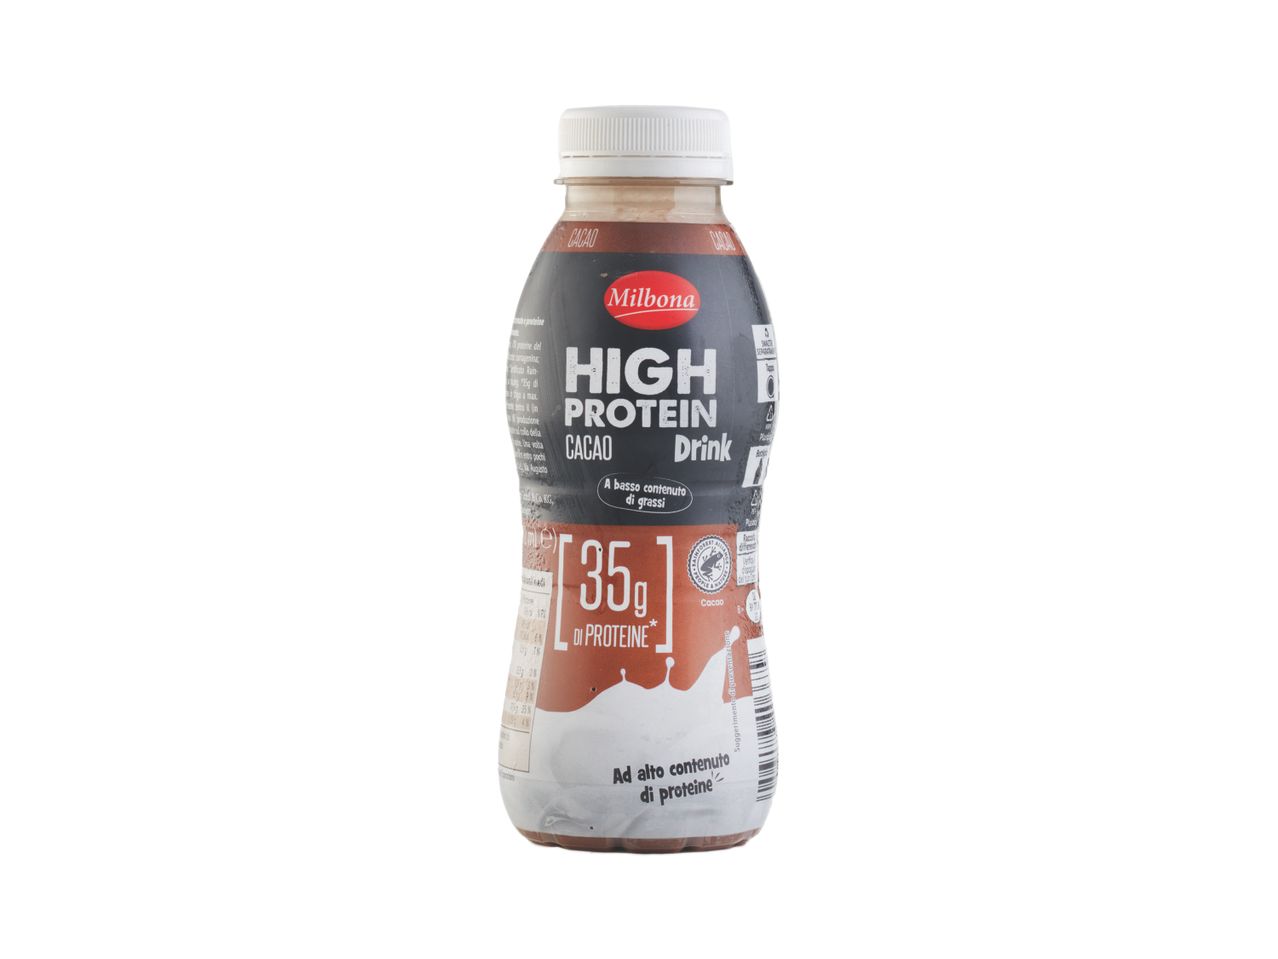 Go to full screen view: High Protein Cocoa Drink - Image 1